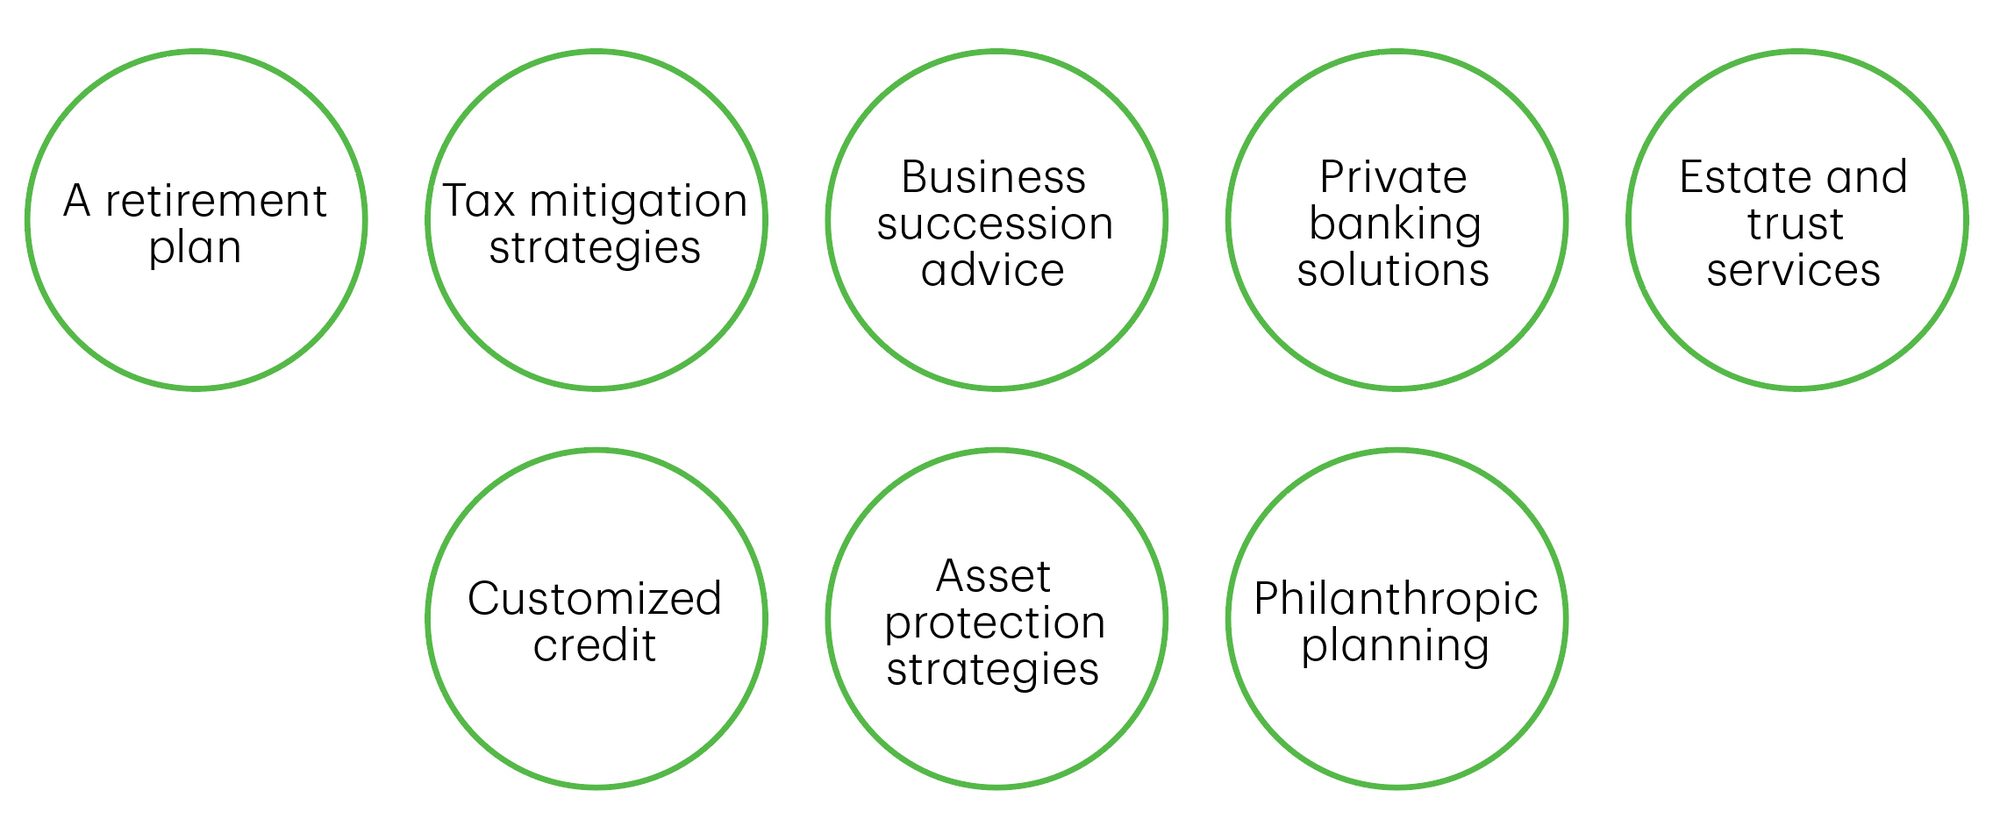 TD Specialists Services Graphic.jpg